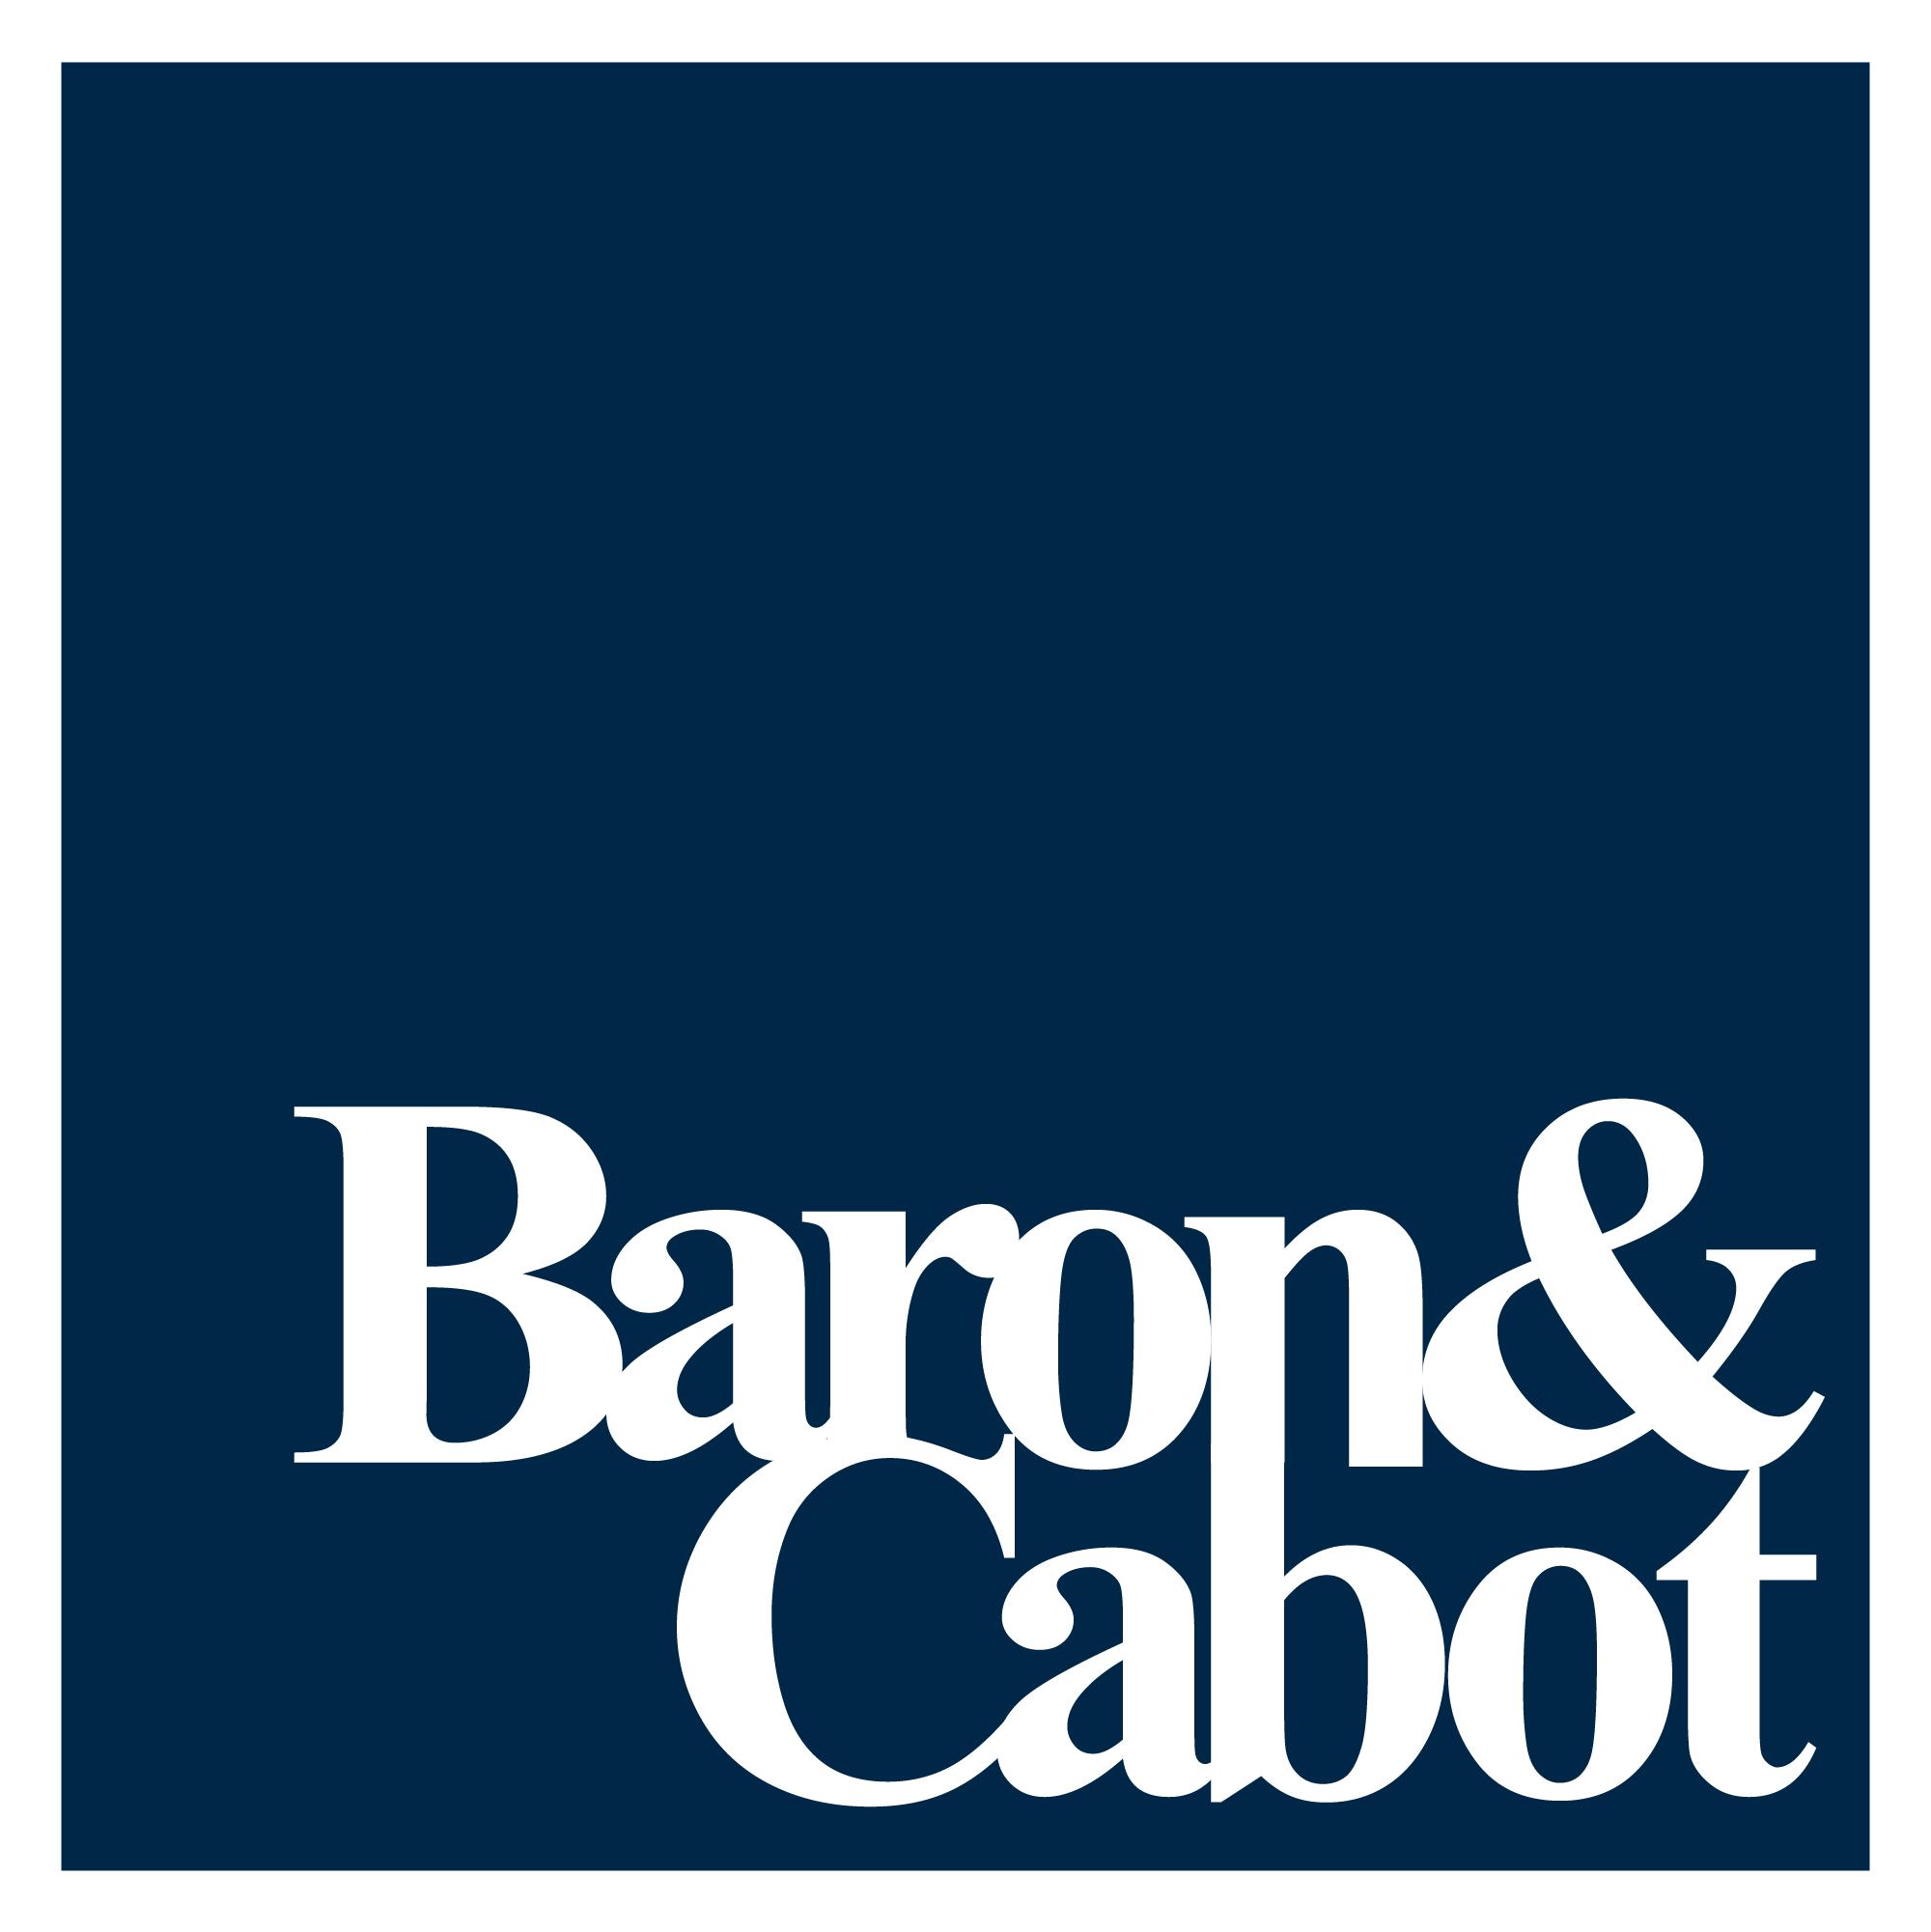 Baron & Cabot company helps Kenyans to invest in real estate within the United Kingdom. www.theexchange.africa